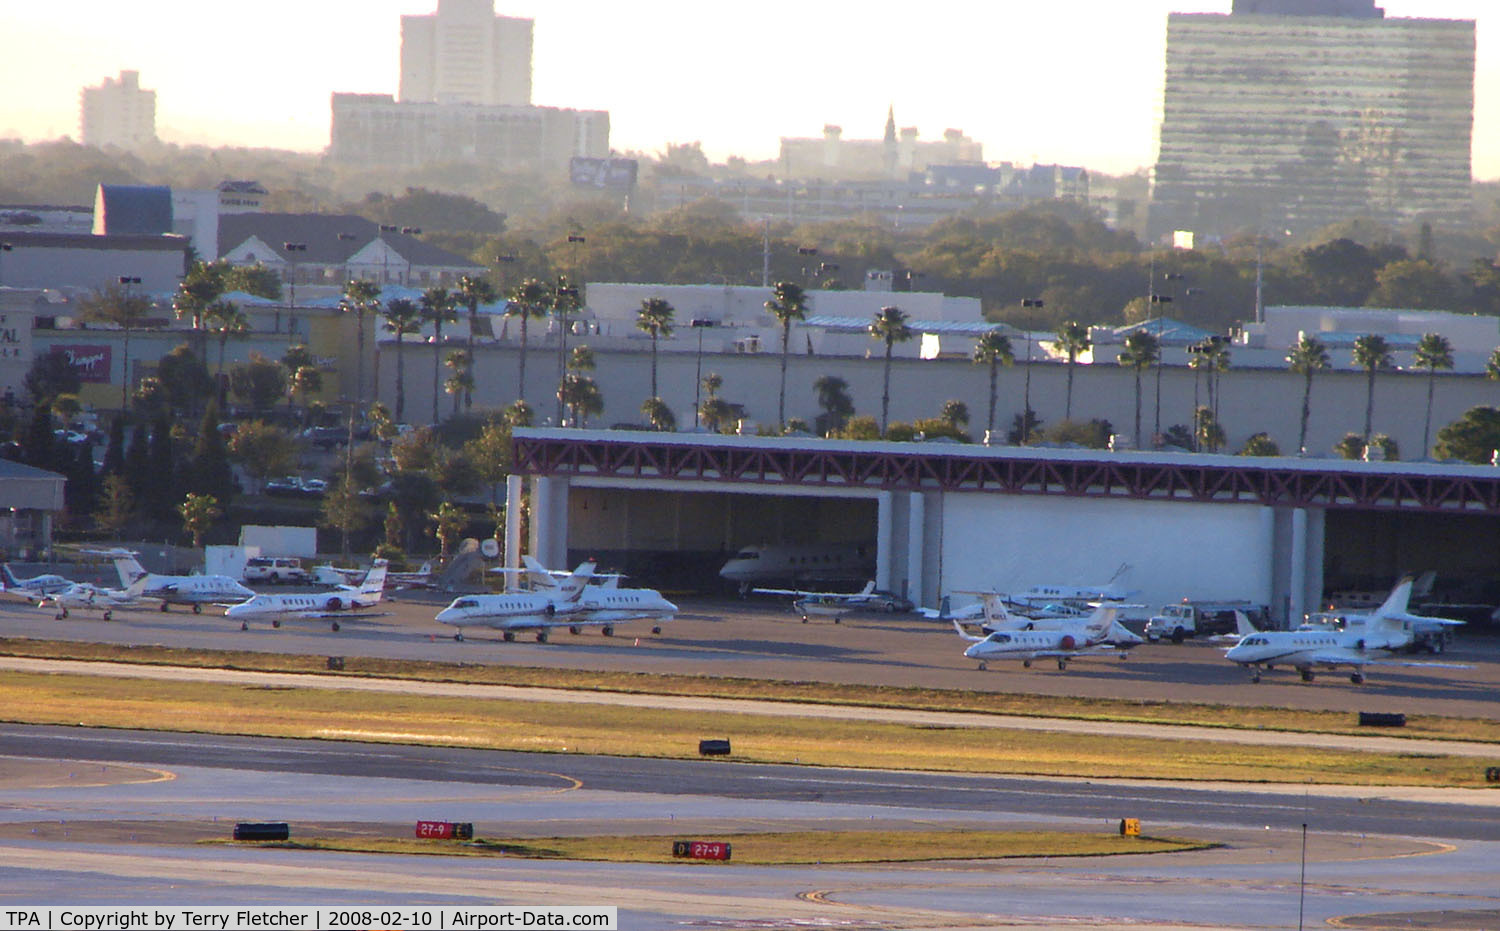 Tampa International Airport (TPA) - A view of the Executive ramp at Tampa